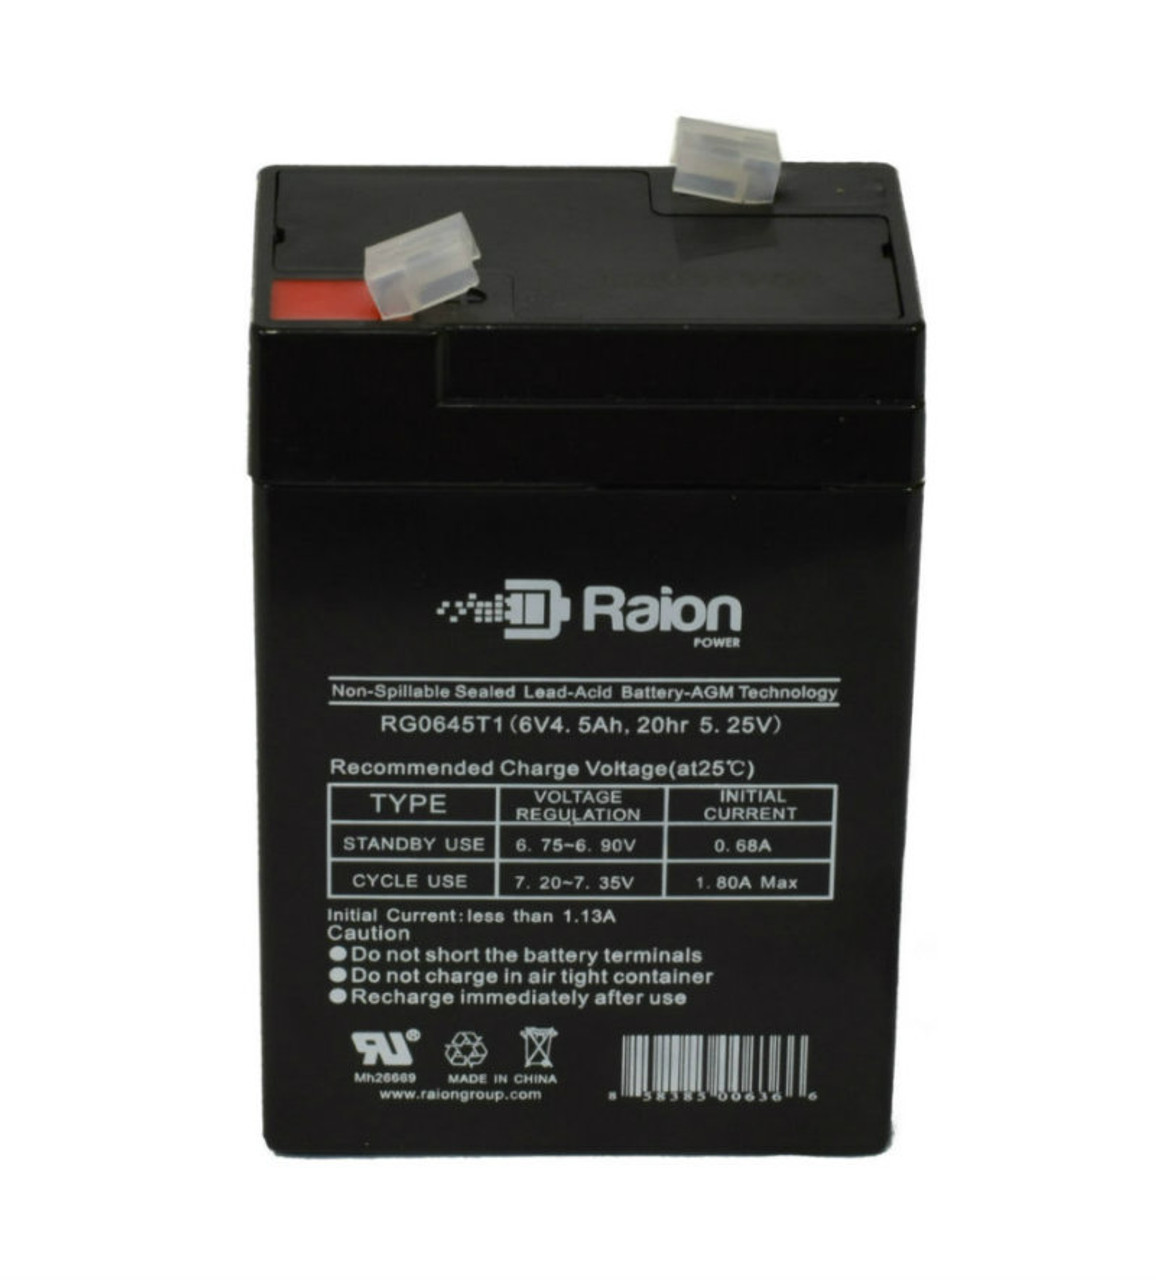 Raion Power RG0645T1 Replacement Battery Cartridge for Dual-Lite 0120800 Battery